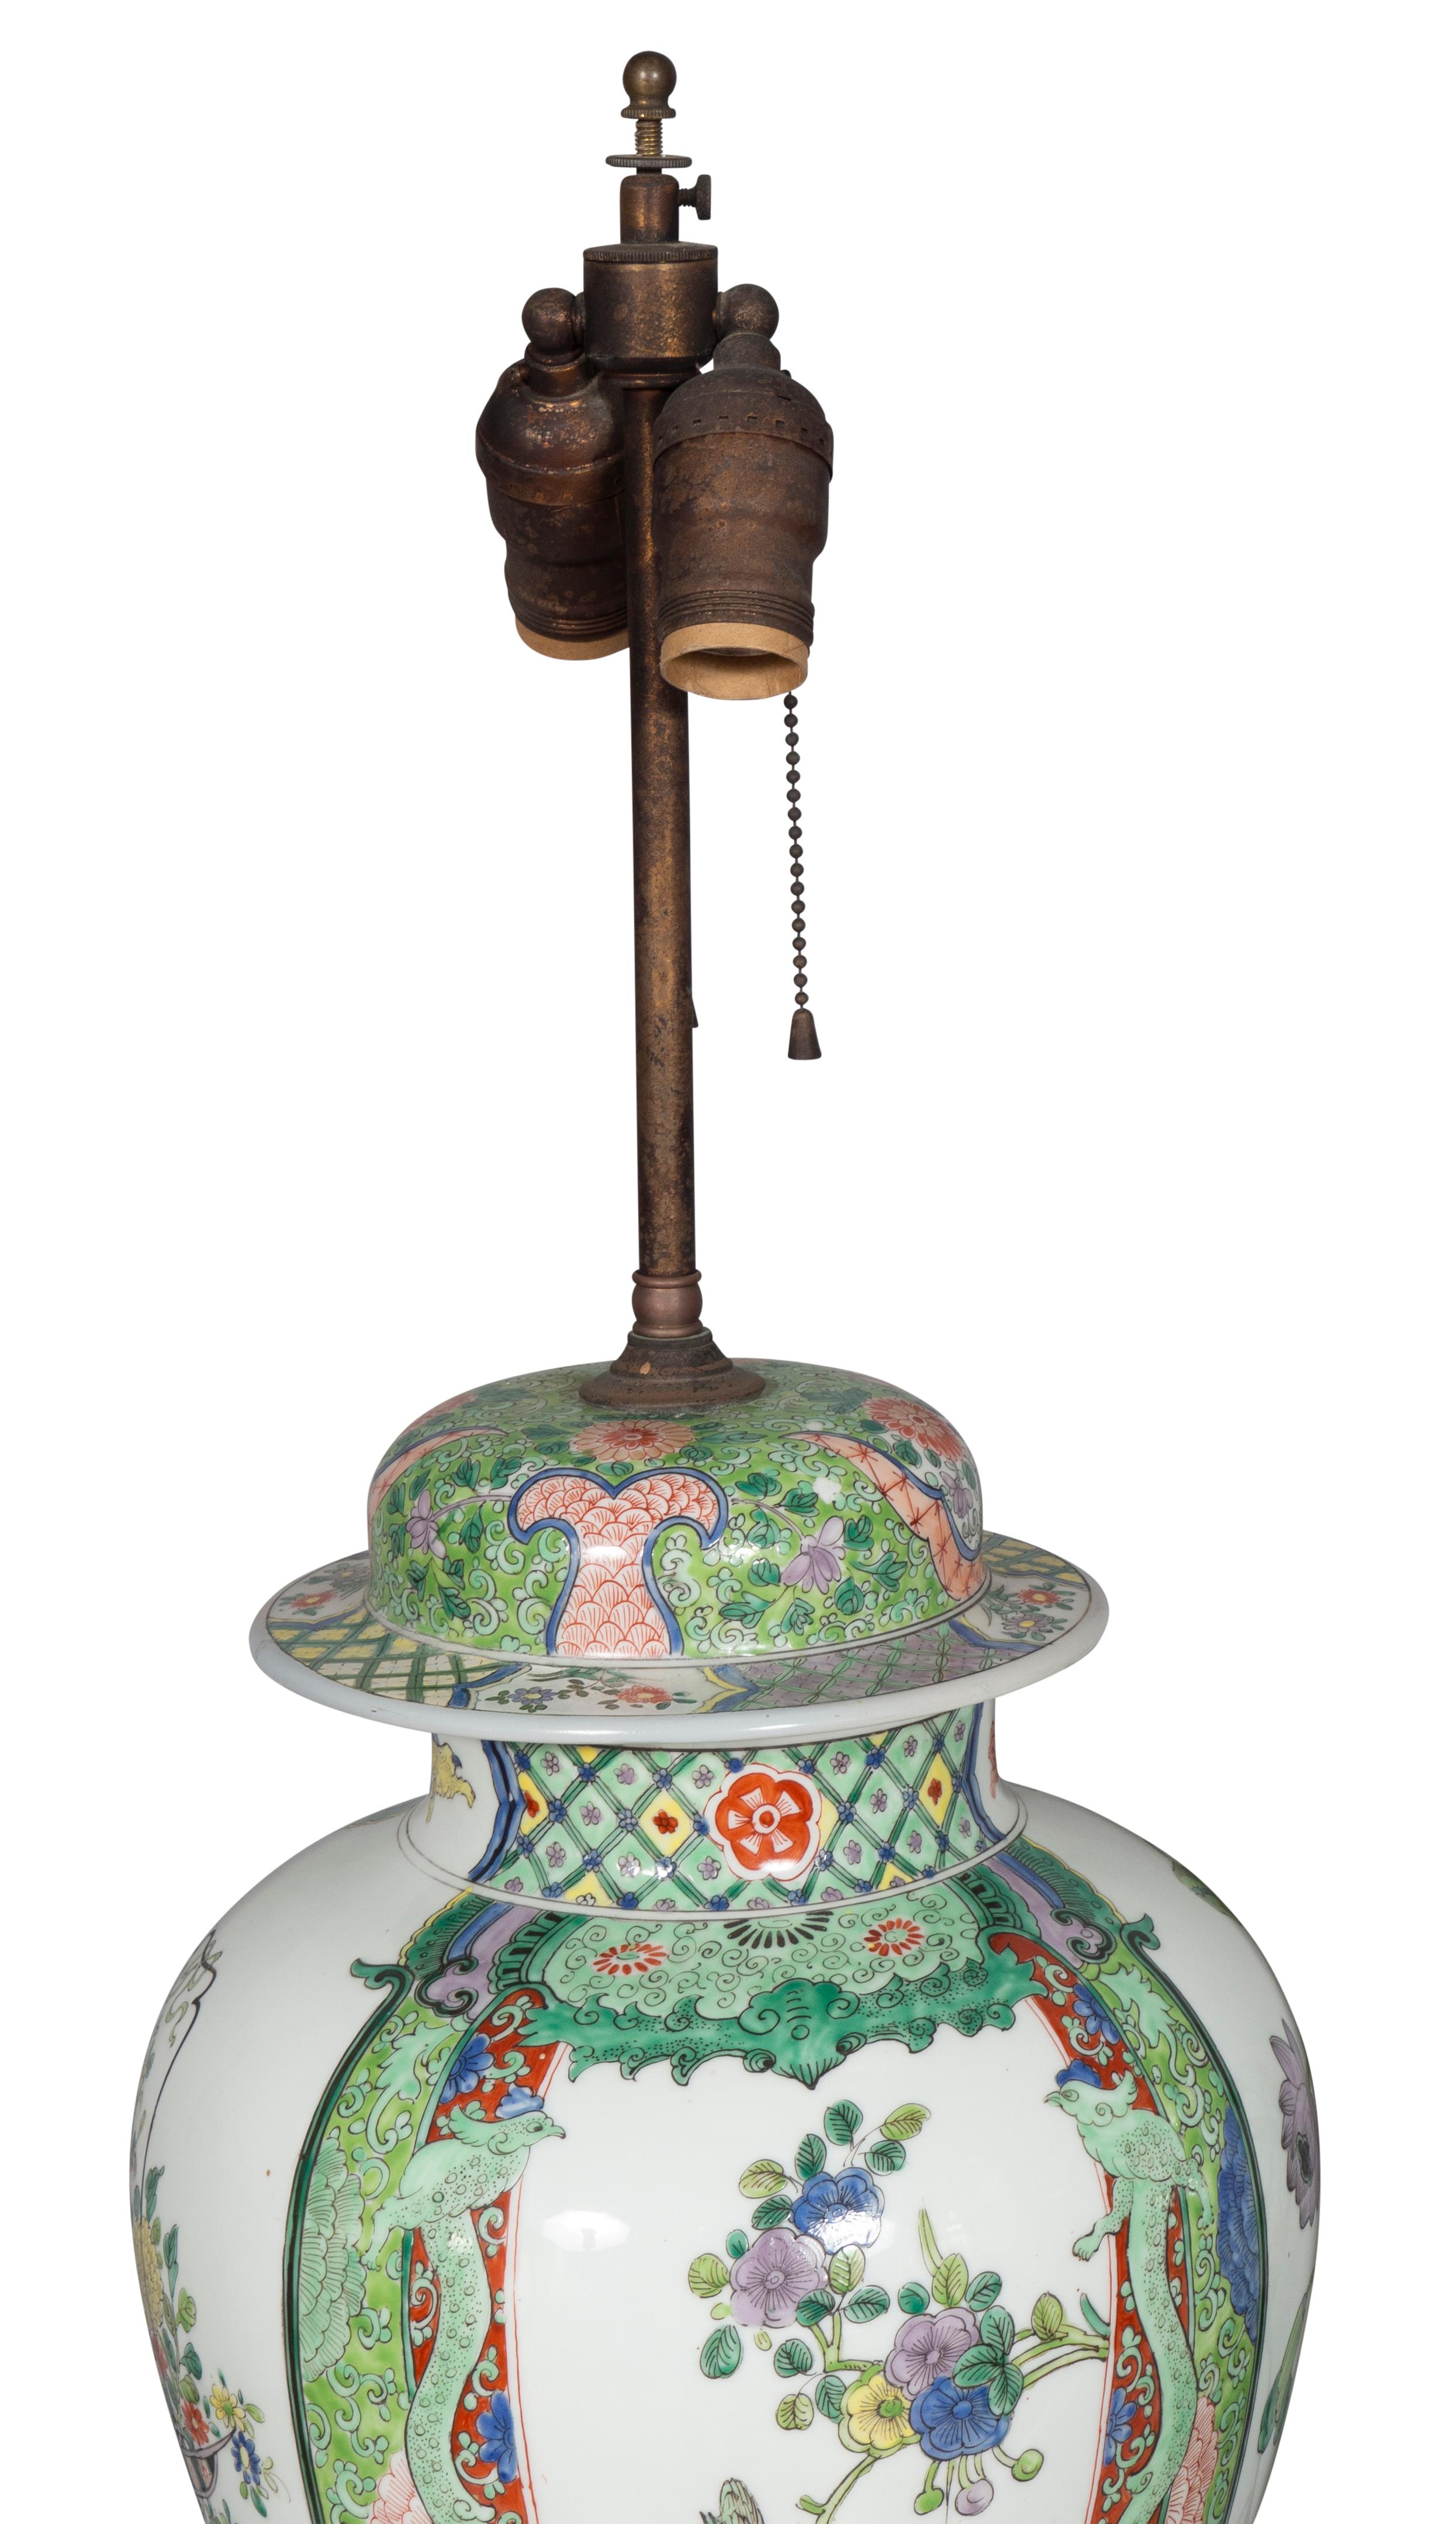 French Pair of Samson Porcelain Ginger Jar Table Lamps in the Chinese Export Style For Sale